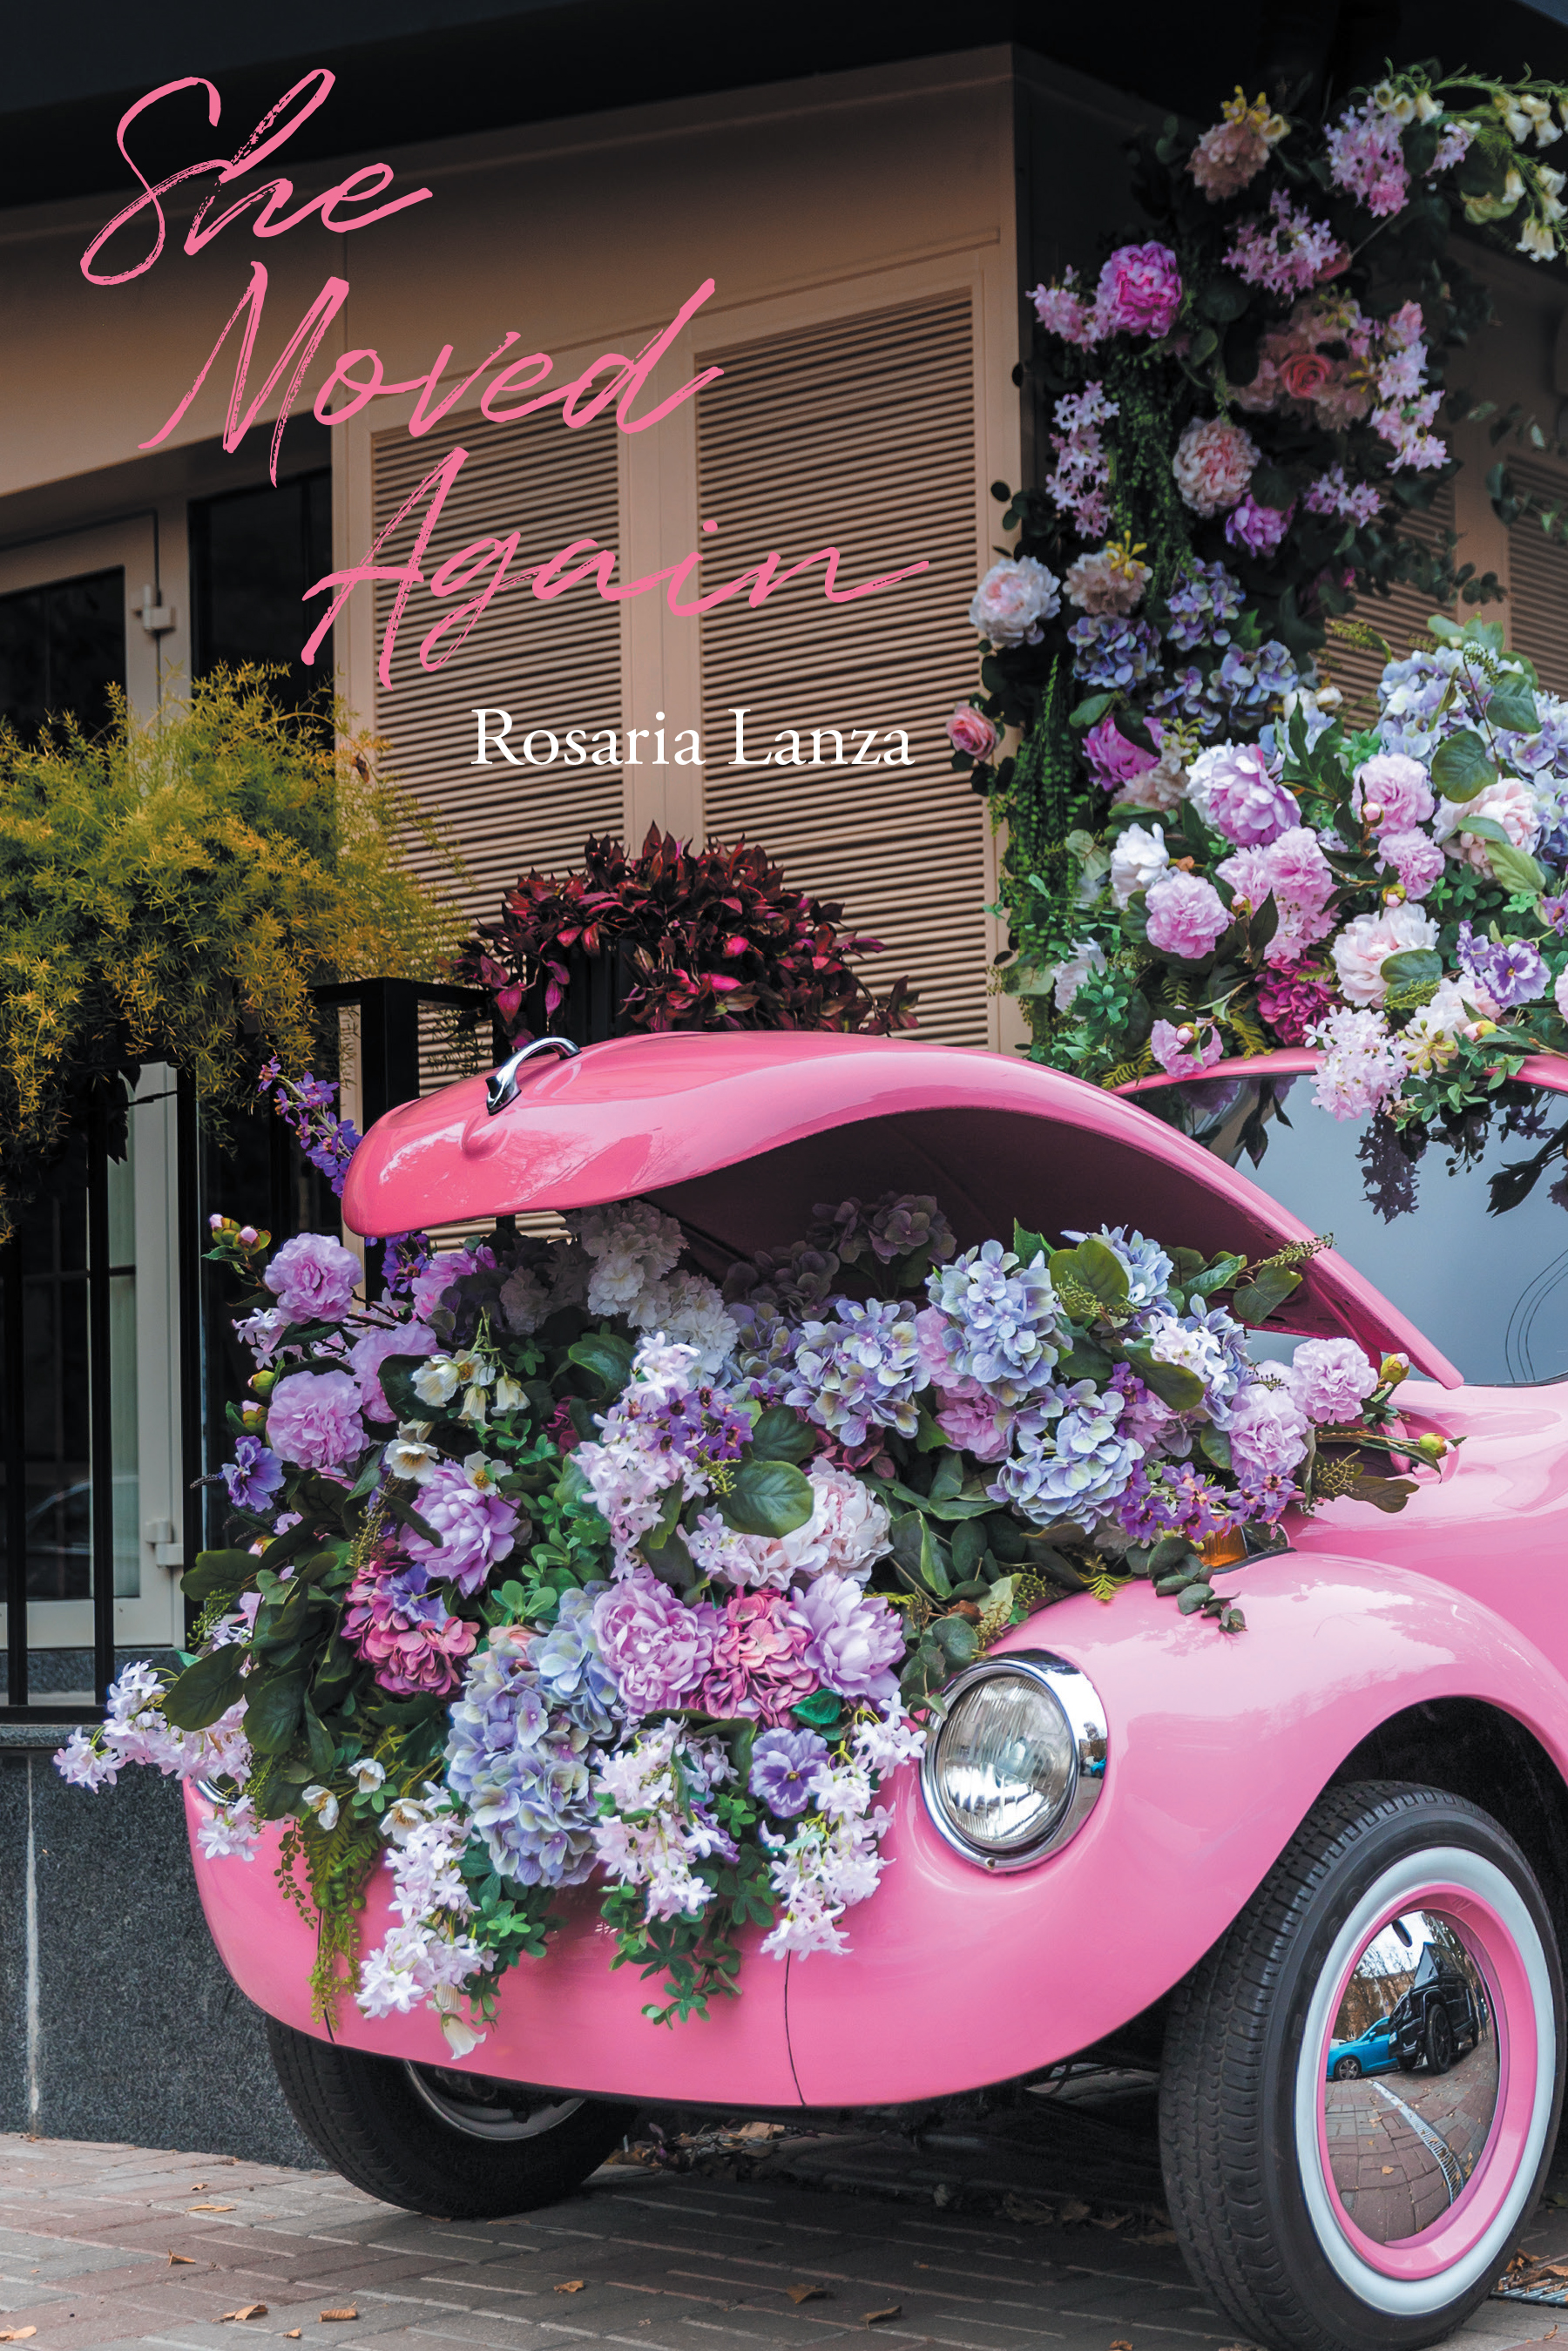 Author Rosaria Lanza’s New Book, "She Moved Again," is a Gripping Story of One Woman’s Struggles to Confront Her Past Instead of Running Away Once More